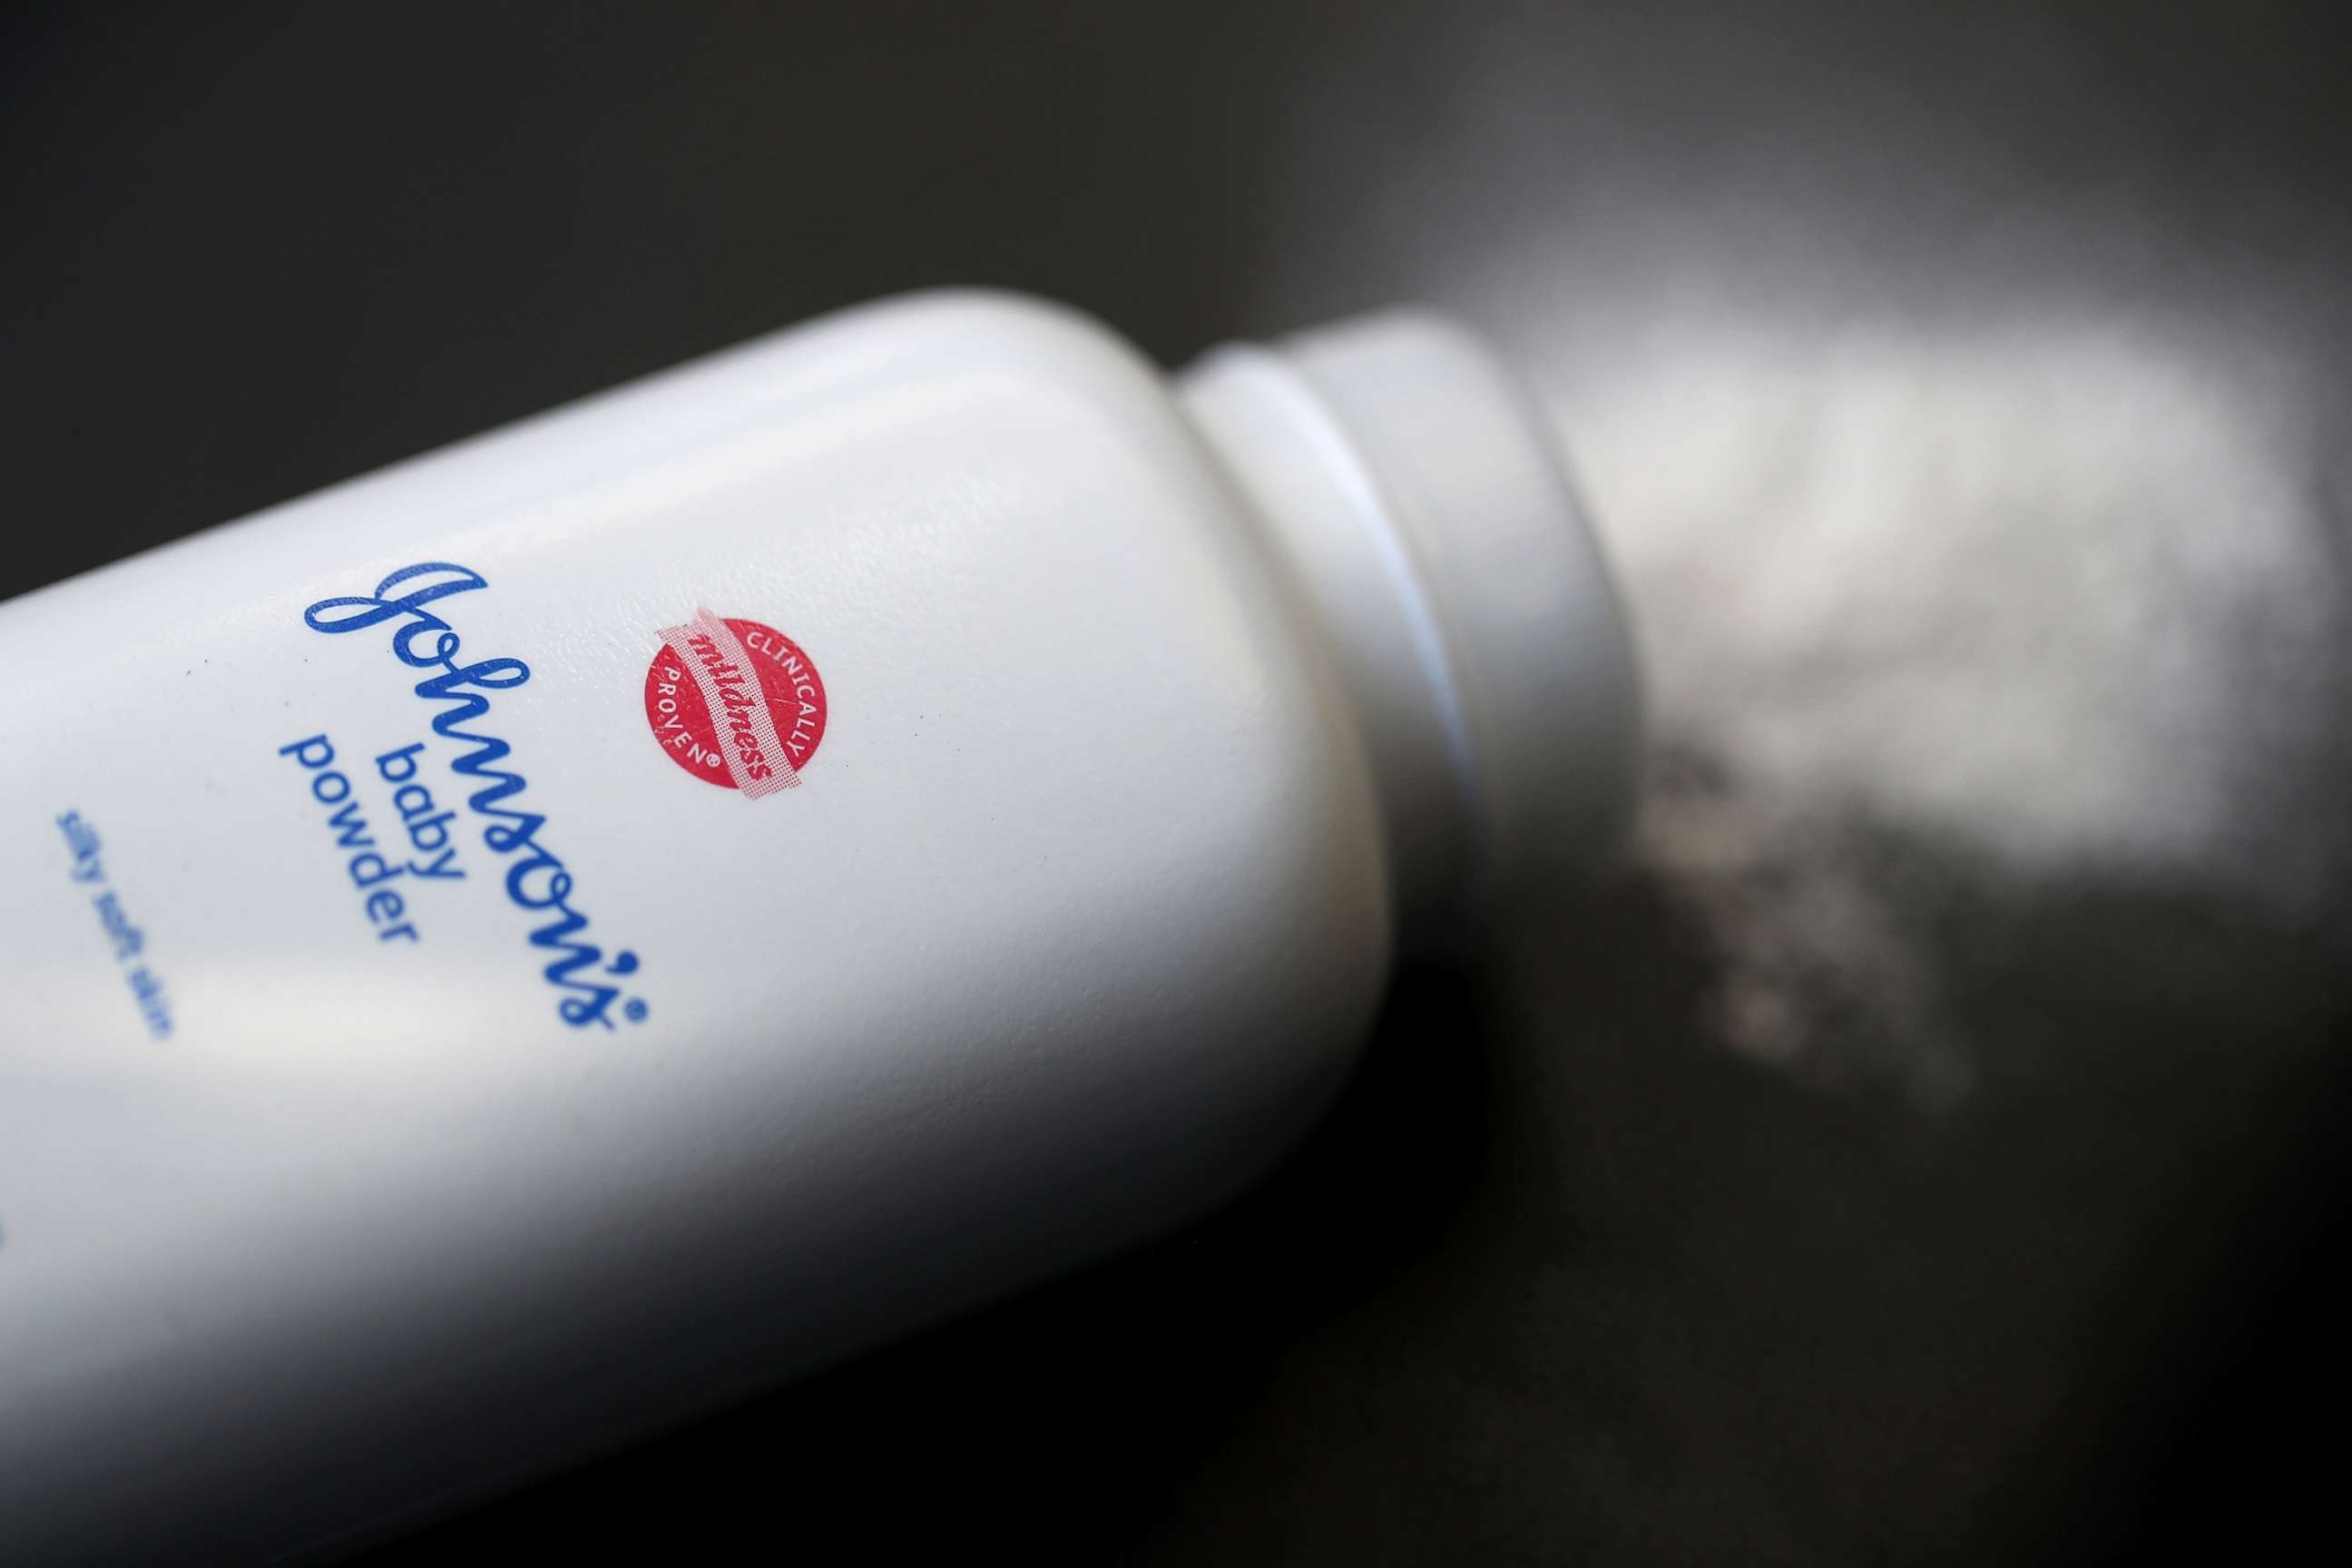 PHOTO: A container of Johnson's baby powder made by Johnson and Johnson sits on a table, July 13, 2018, in San Francisco, Calif.